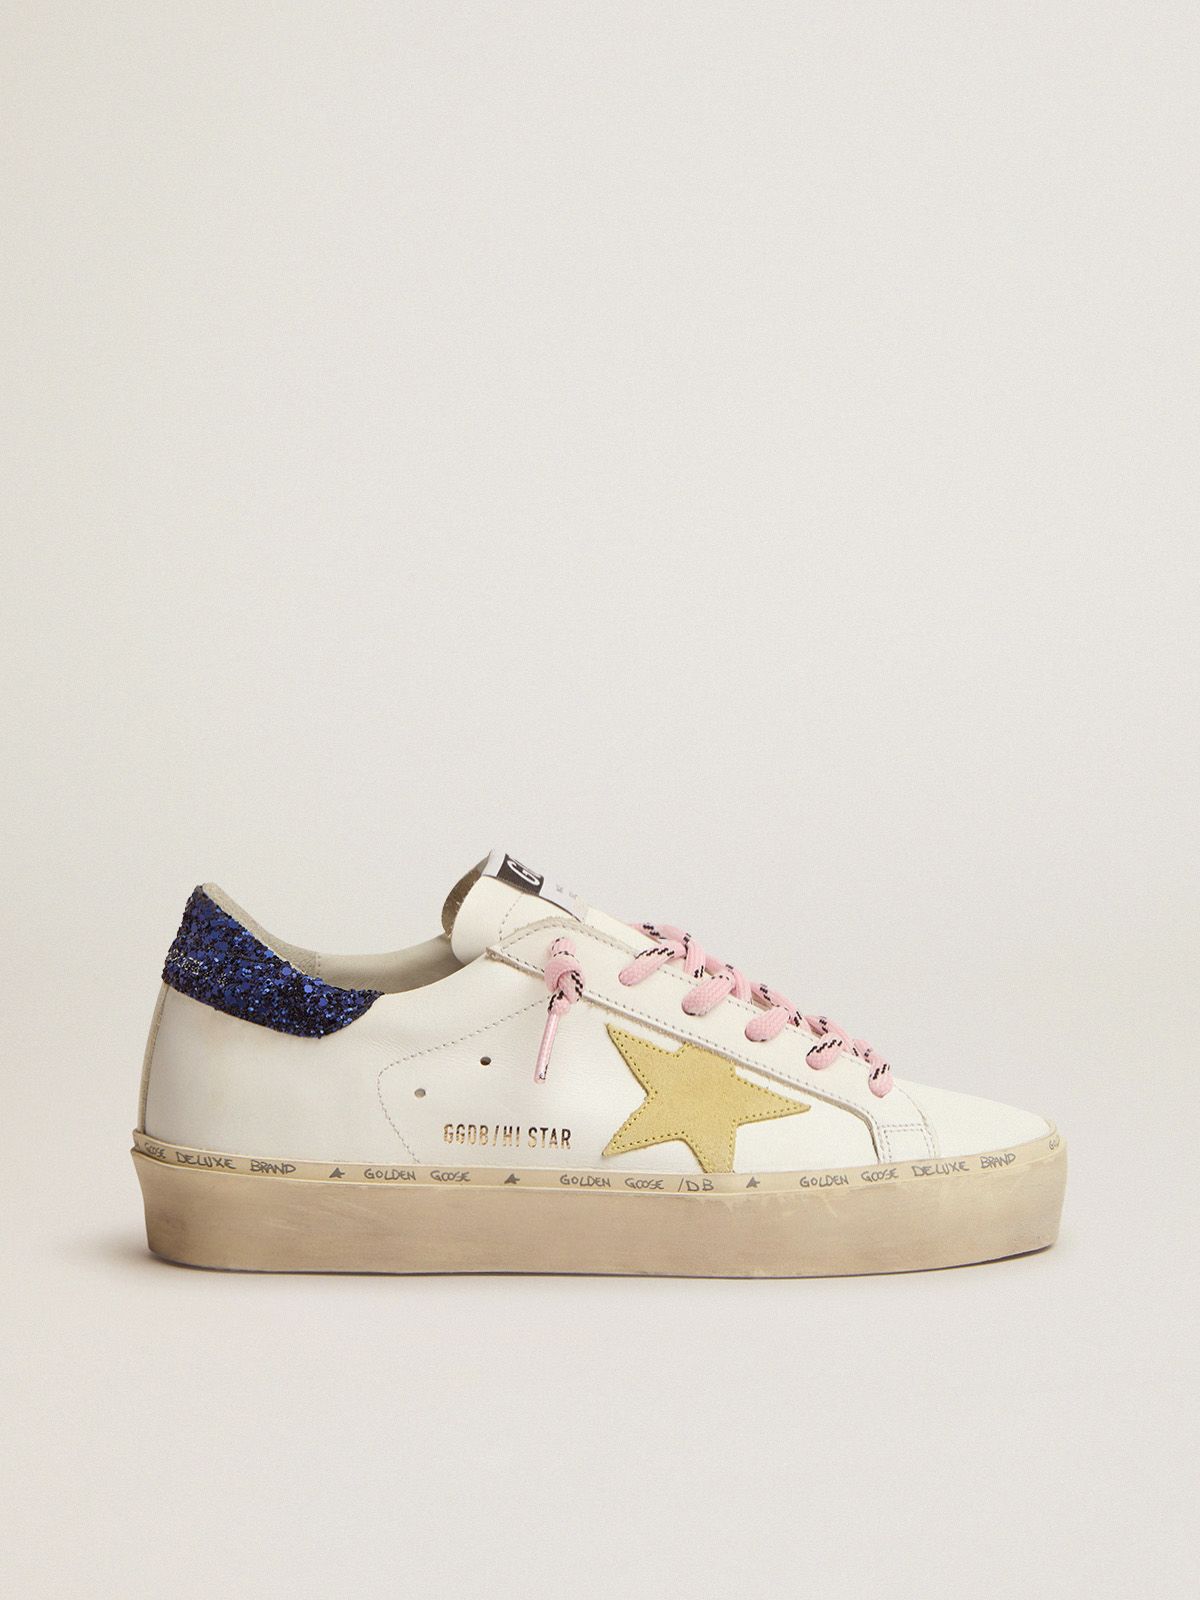 Hi Star LTD sneakers with blue glitter heel tab and yellow suede star